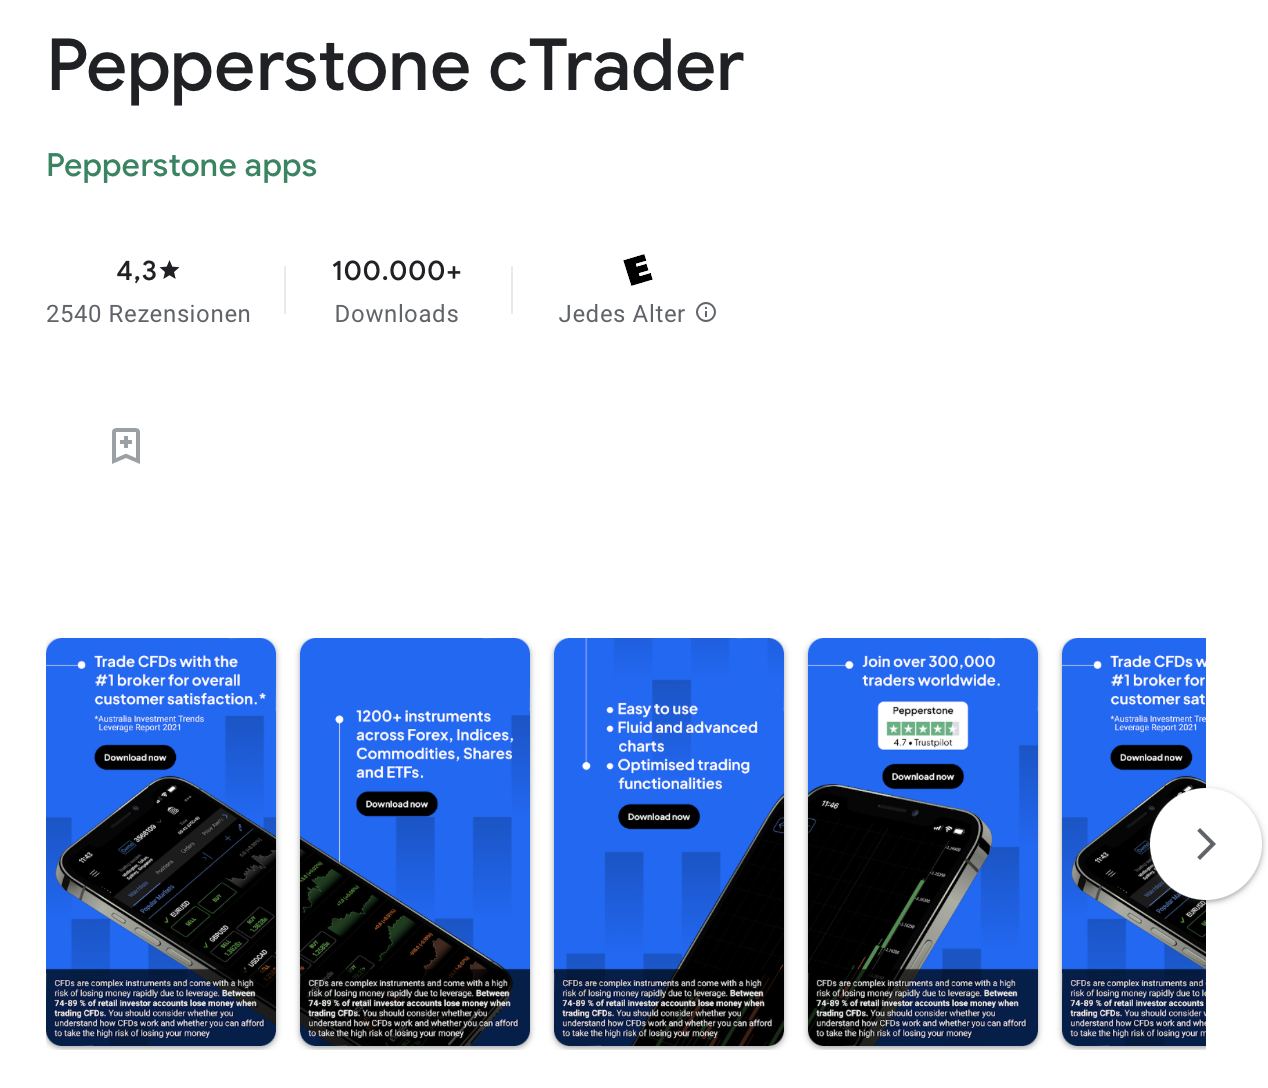 Pepperstone cTrader télécharger sur le Google Play Store